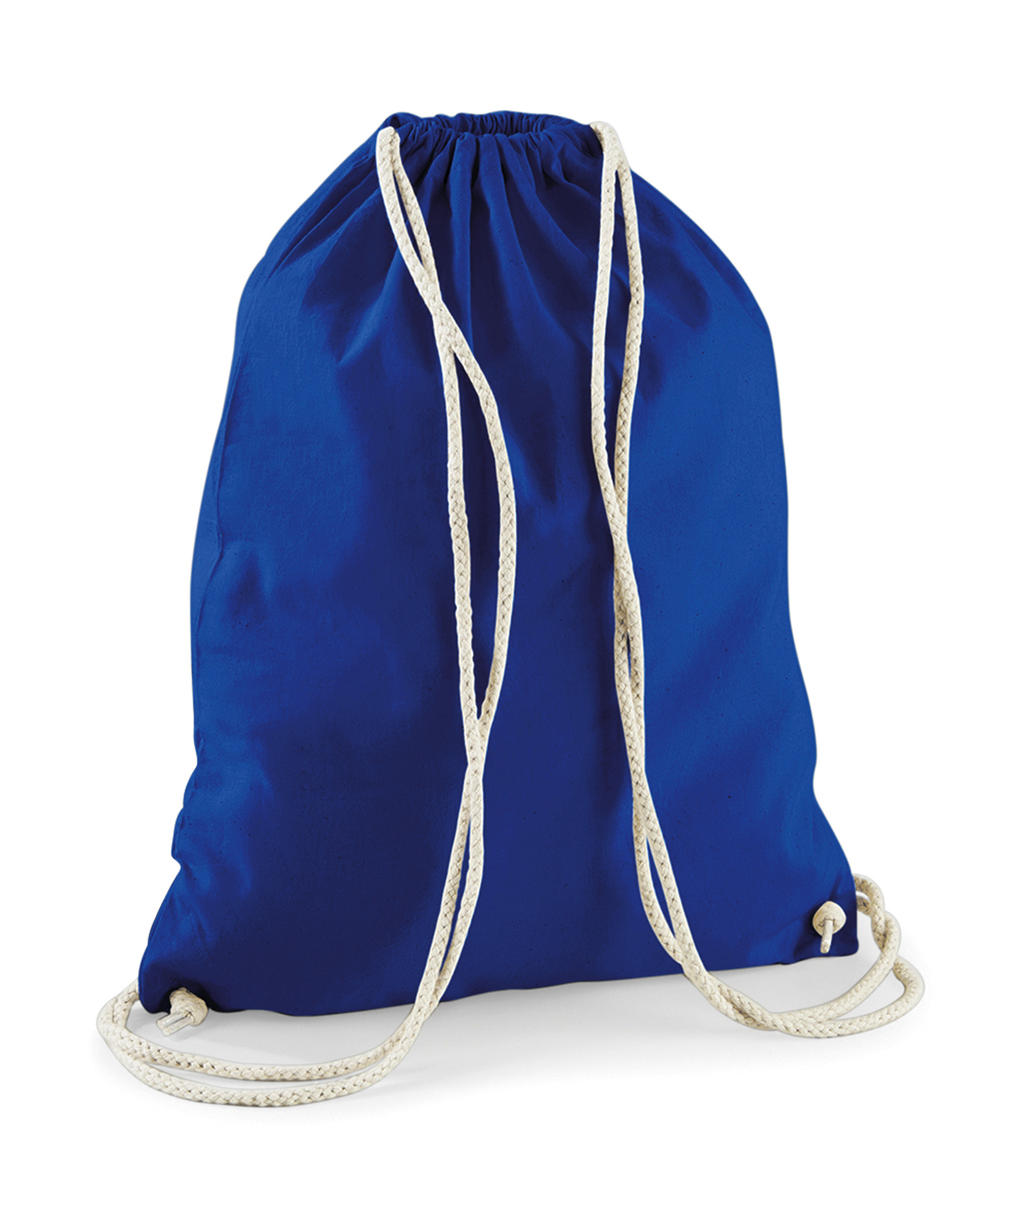  Cotton Gymsac in Farbe Bright Royal